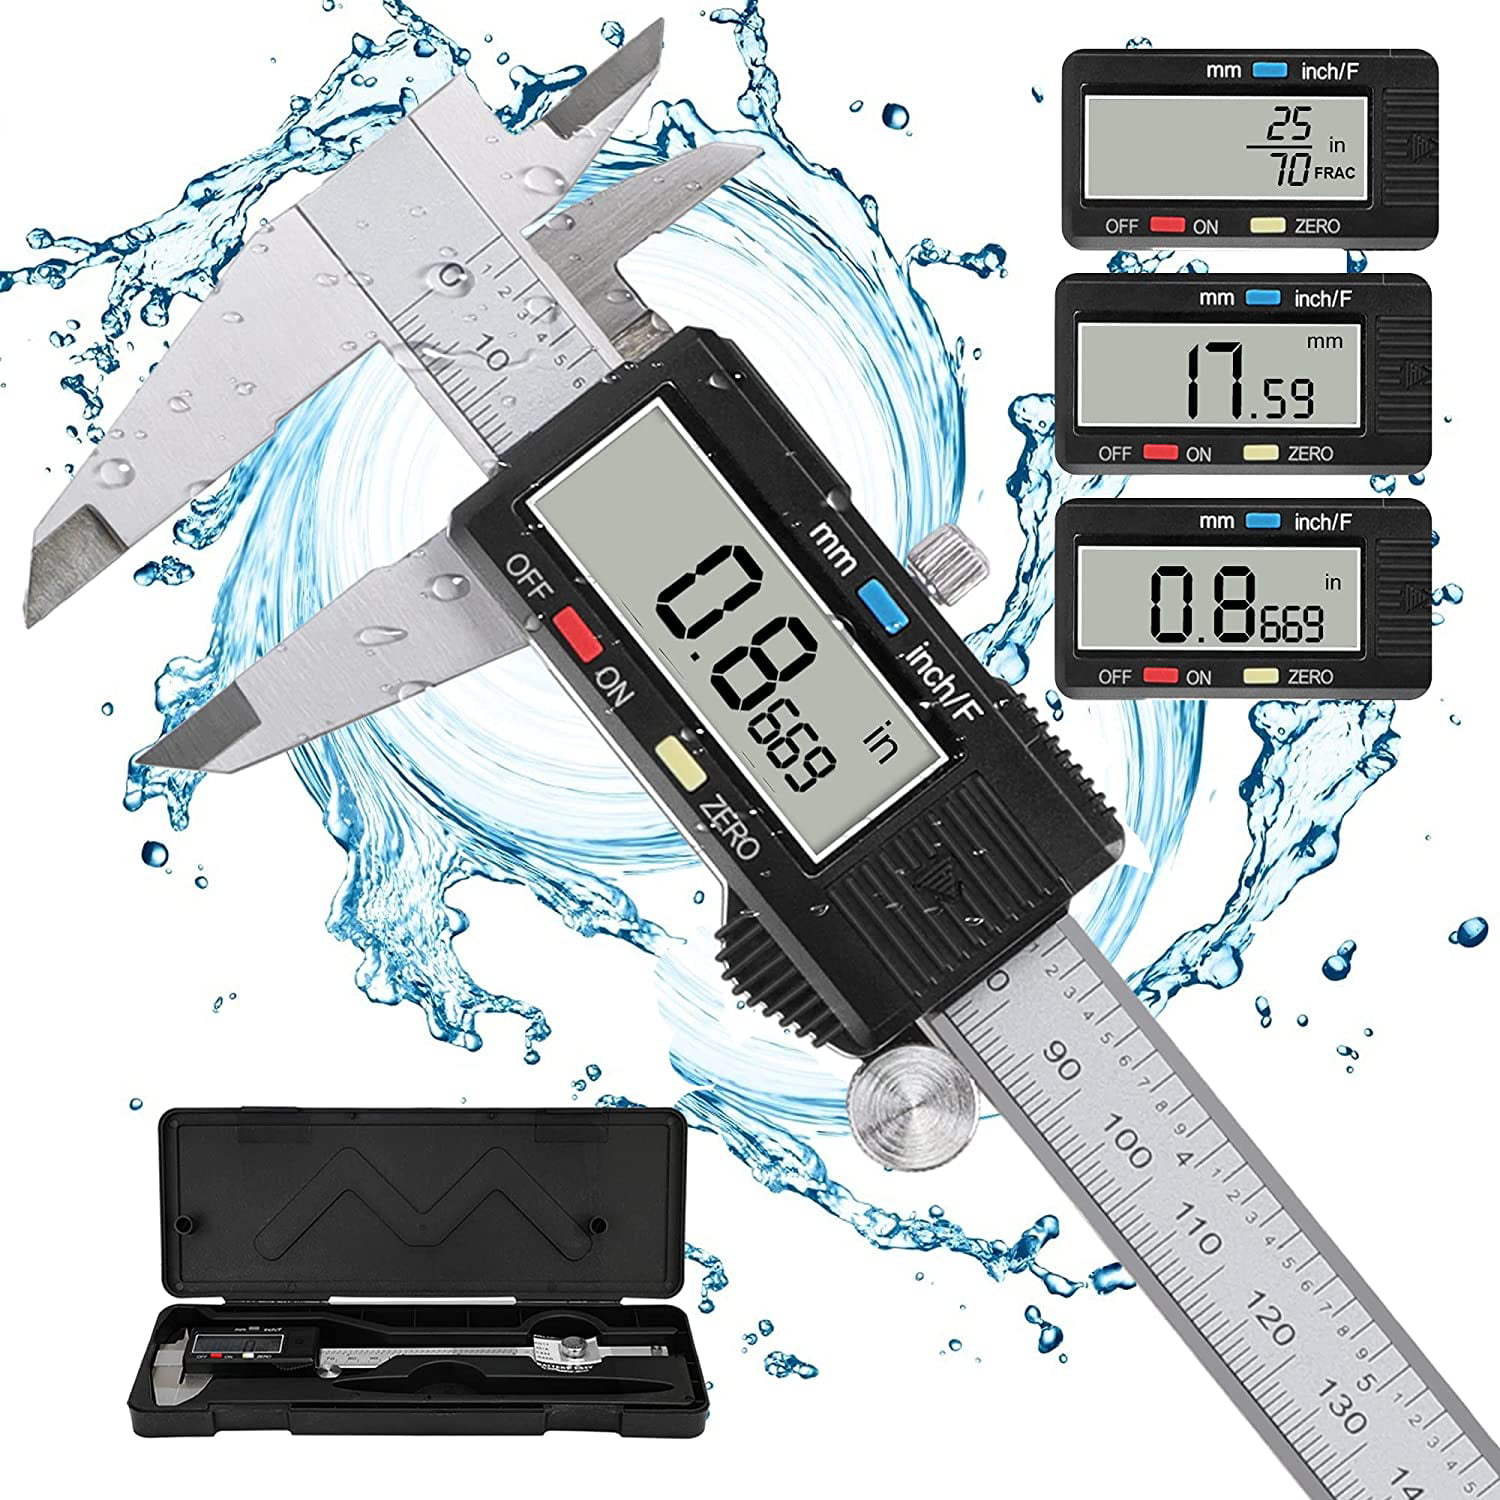 Thumb-Roll Accurate Setting and 150mm 0-6 Inch/Metric Conversion,IP54,Auto Off Mode DC02 Caliper Tacklife Digital Vernier Caliper Stainless Steel with Higher Accuracy